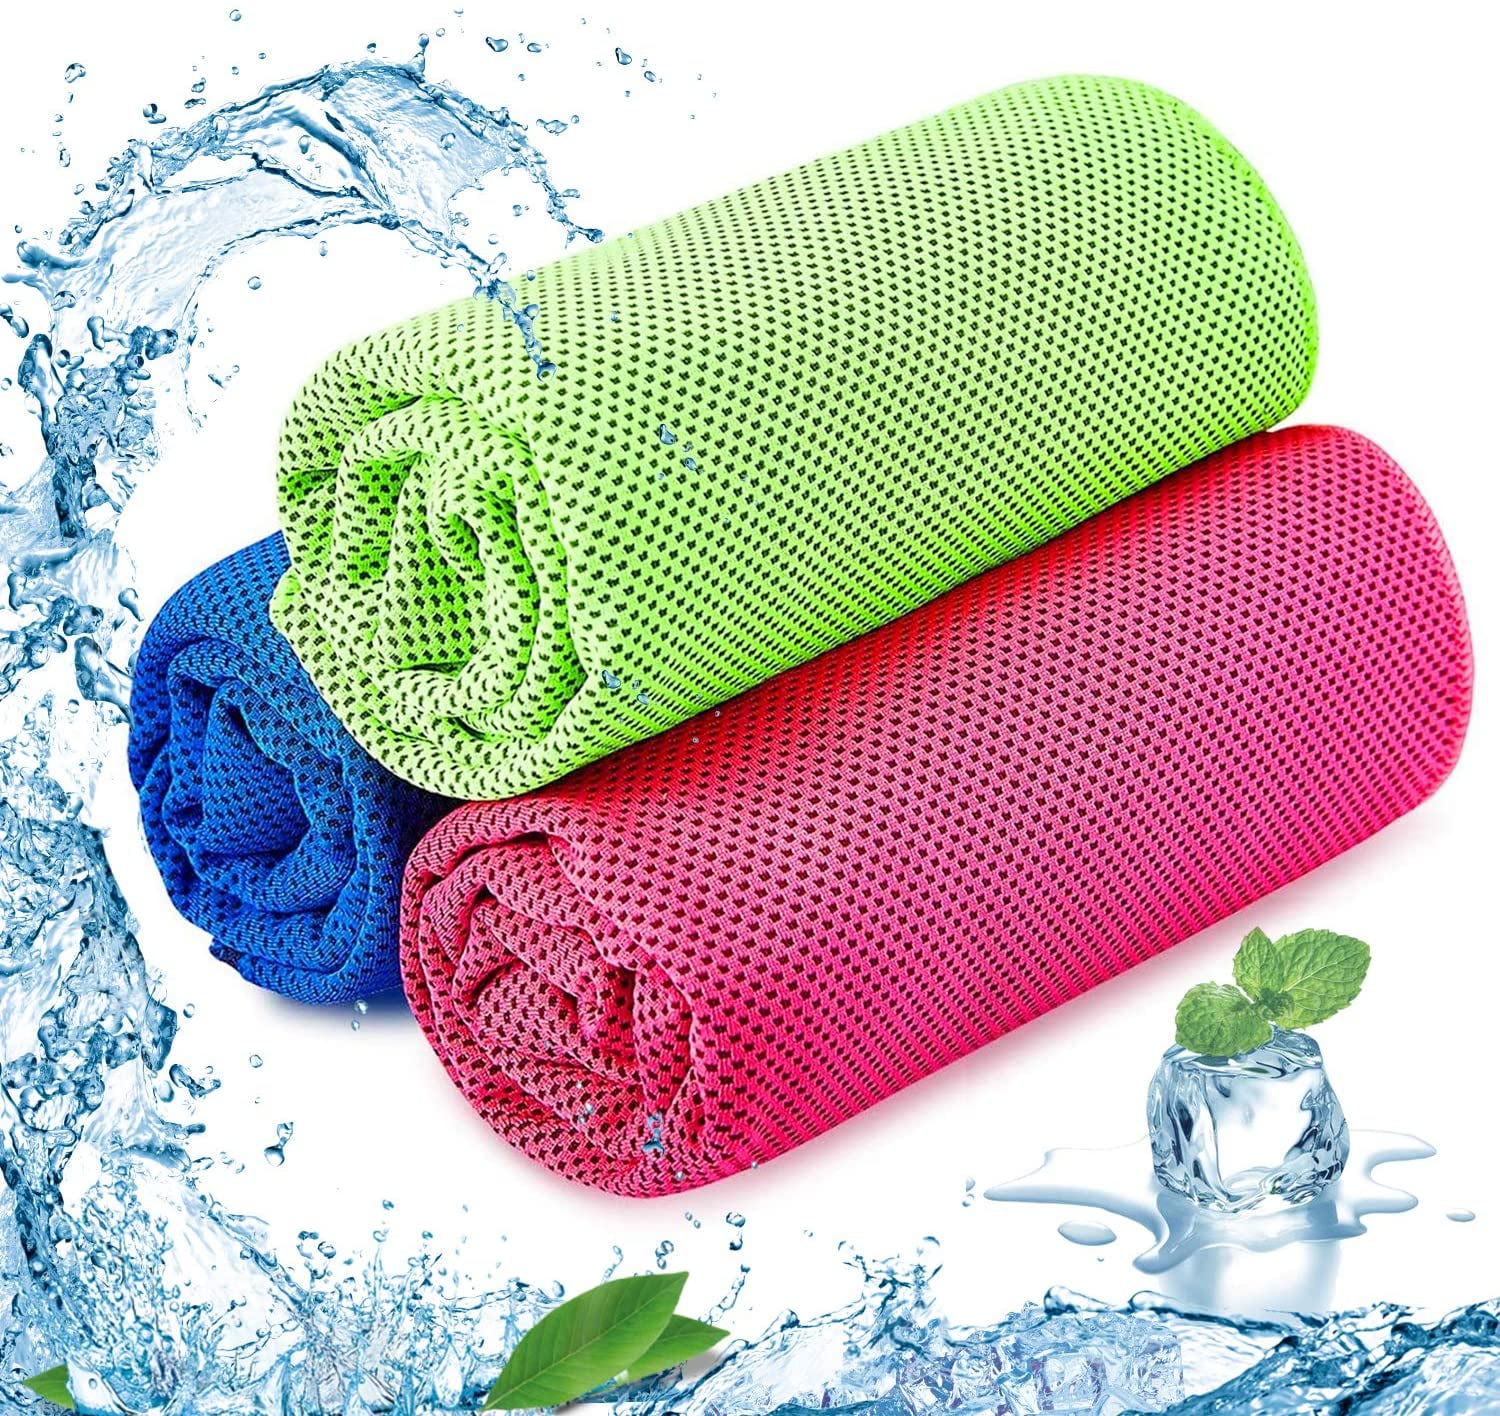 6 Packs Cooling Towel ,Ice Towel,Microfiber Towel,Soft Breathable Chilly Towel for Yoga,Sport,Gym,Workout,Camping,Fitness Running,Workout & More Activities 40x 12 